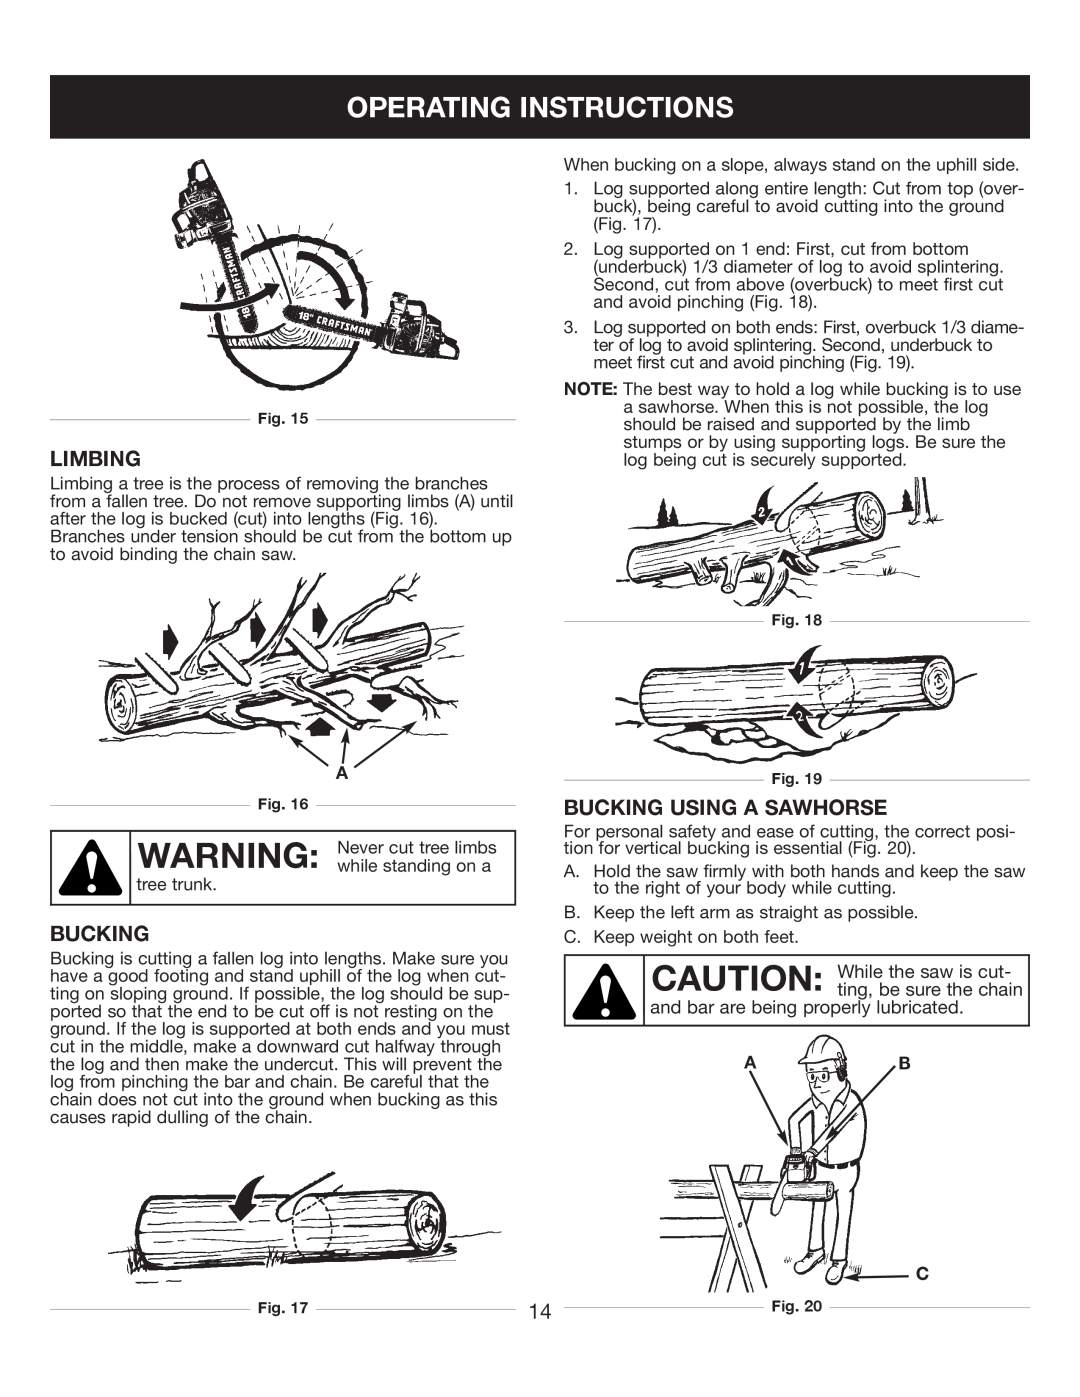 Sears 316.35084 manual Operating Instructions, Limbing, Bucking Using A Sawhorse, and bar are being properly lubricated 